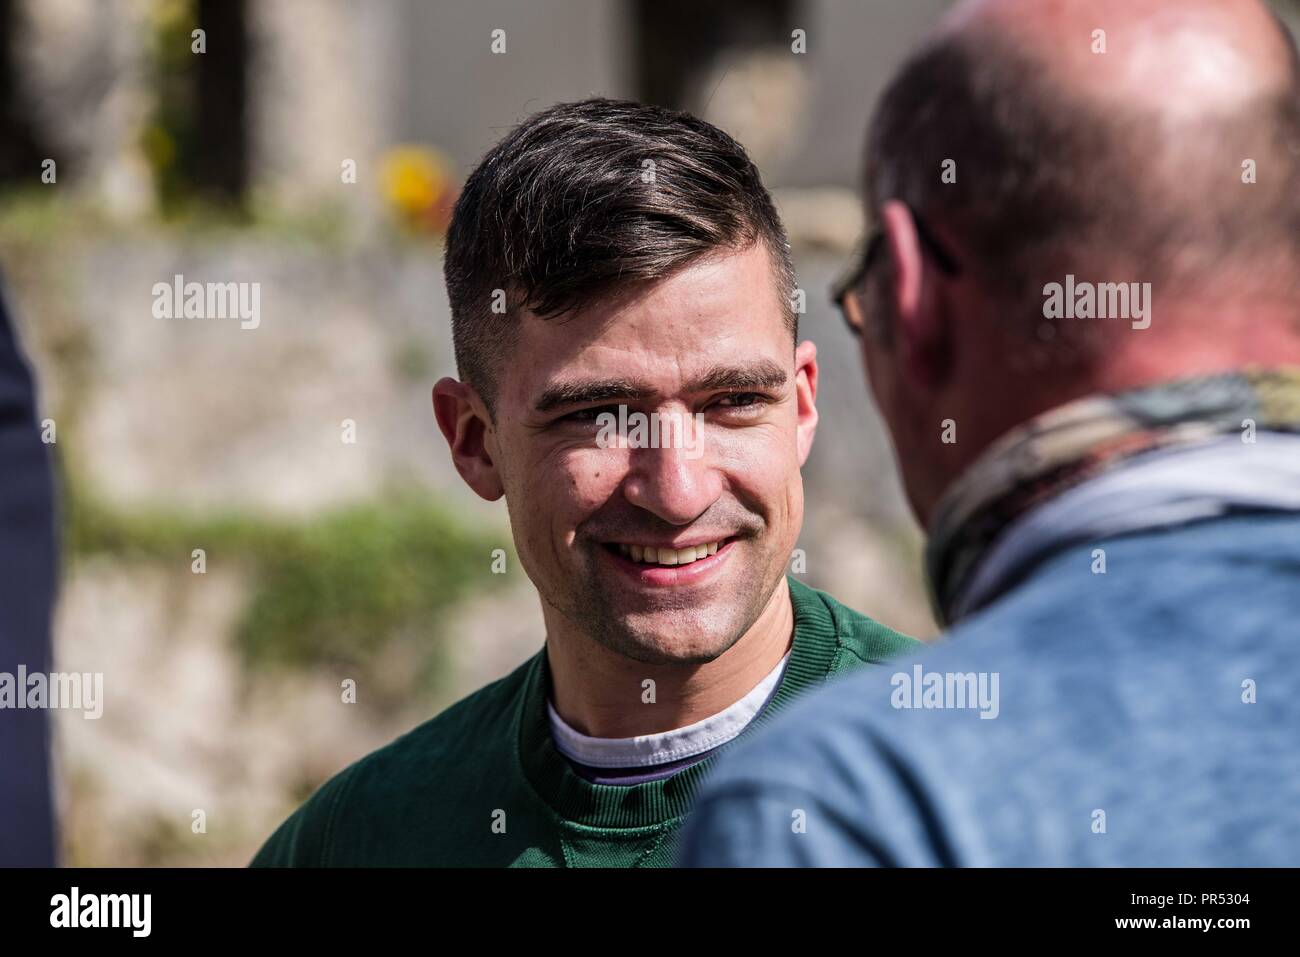 Garmisch Partenkirchen, Bavaria, Germany. 29th Sep, 2018. Austrian right-extremist and head of the Identitaeren Movement MARTIN SELLNER. Sellner is also associated with white supremacists in the United States and Canada. Adding themselves to the 'who's who'' list of of several hundred right-extremists from Germany, Austria, Switzerland, and other countries, Tommy Robinson, founder of the British EDL, Lutz Bachmann, grounder of Germany's Pegida, and Martin Sellner of the Identitaere Bewegung were guests as the Compact Konferenz held in the international tourist town of Garmisch Pa Stock Photo